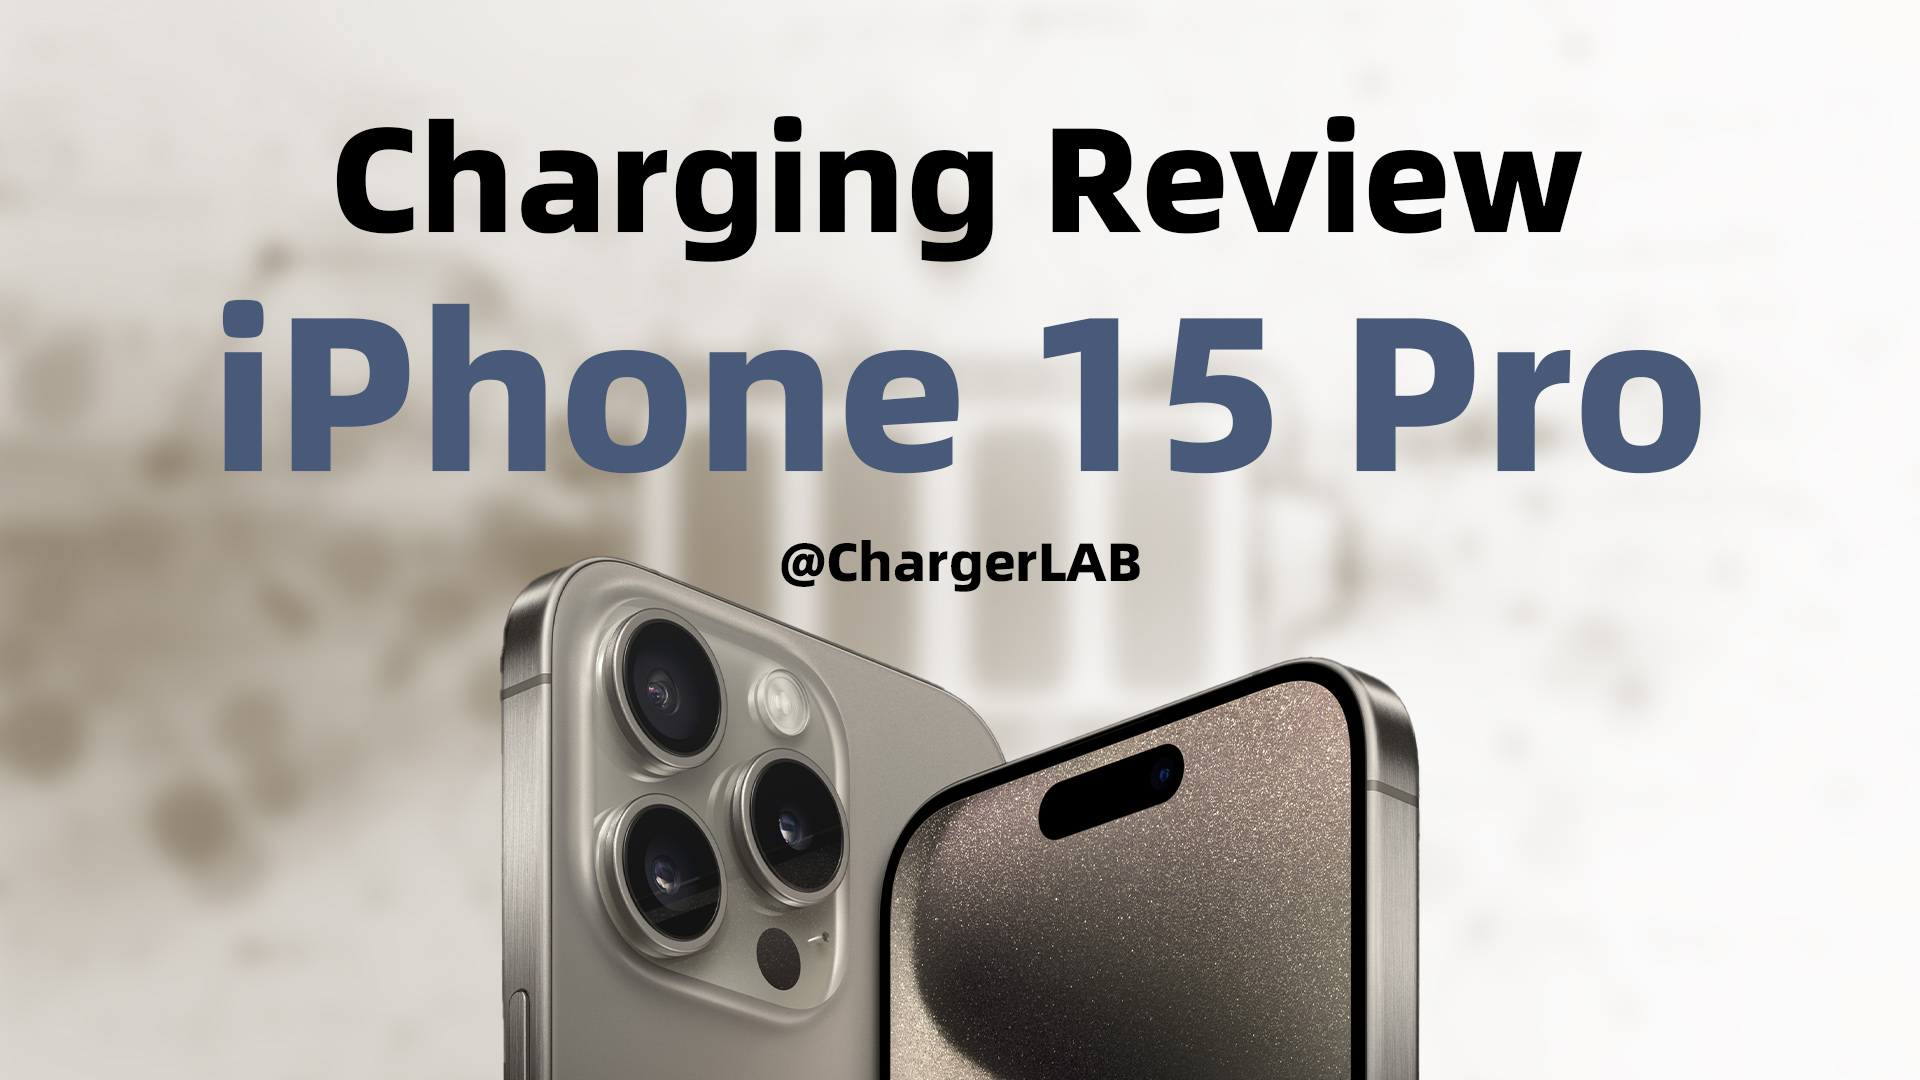 Charging Review of iPhone 15 Pro Max - Chargerlab